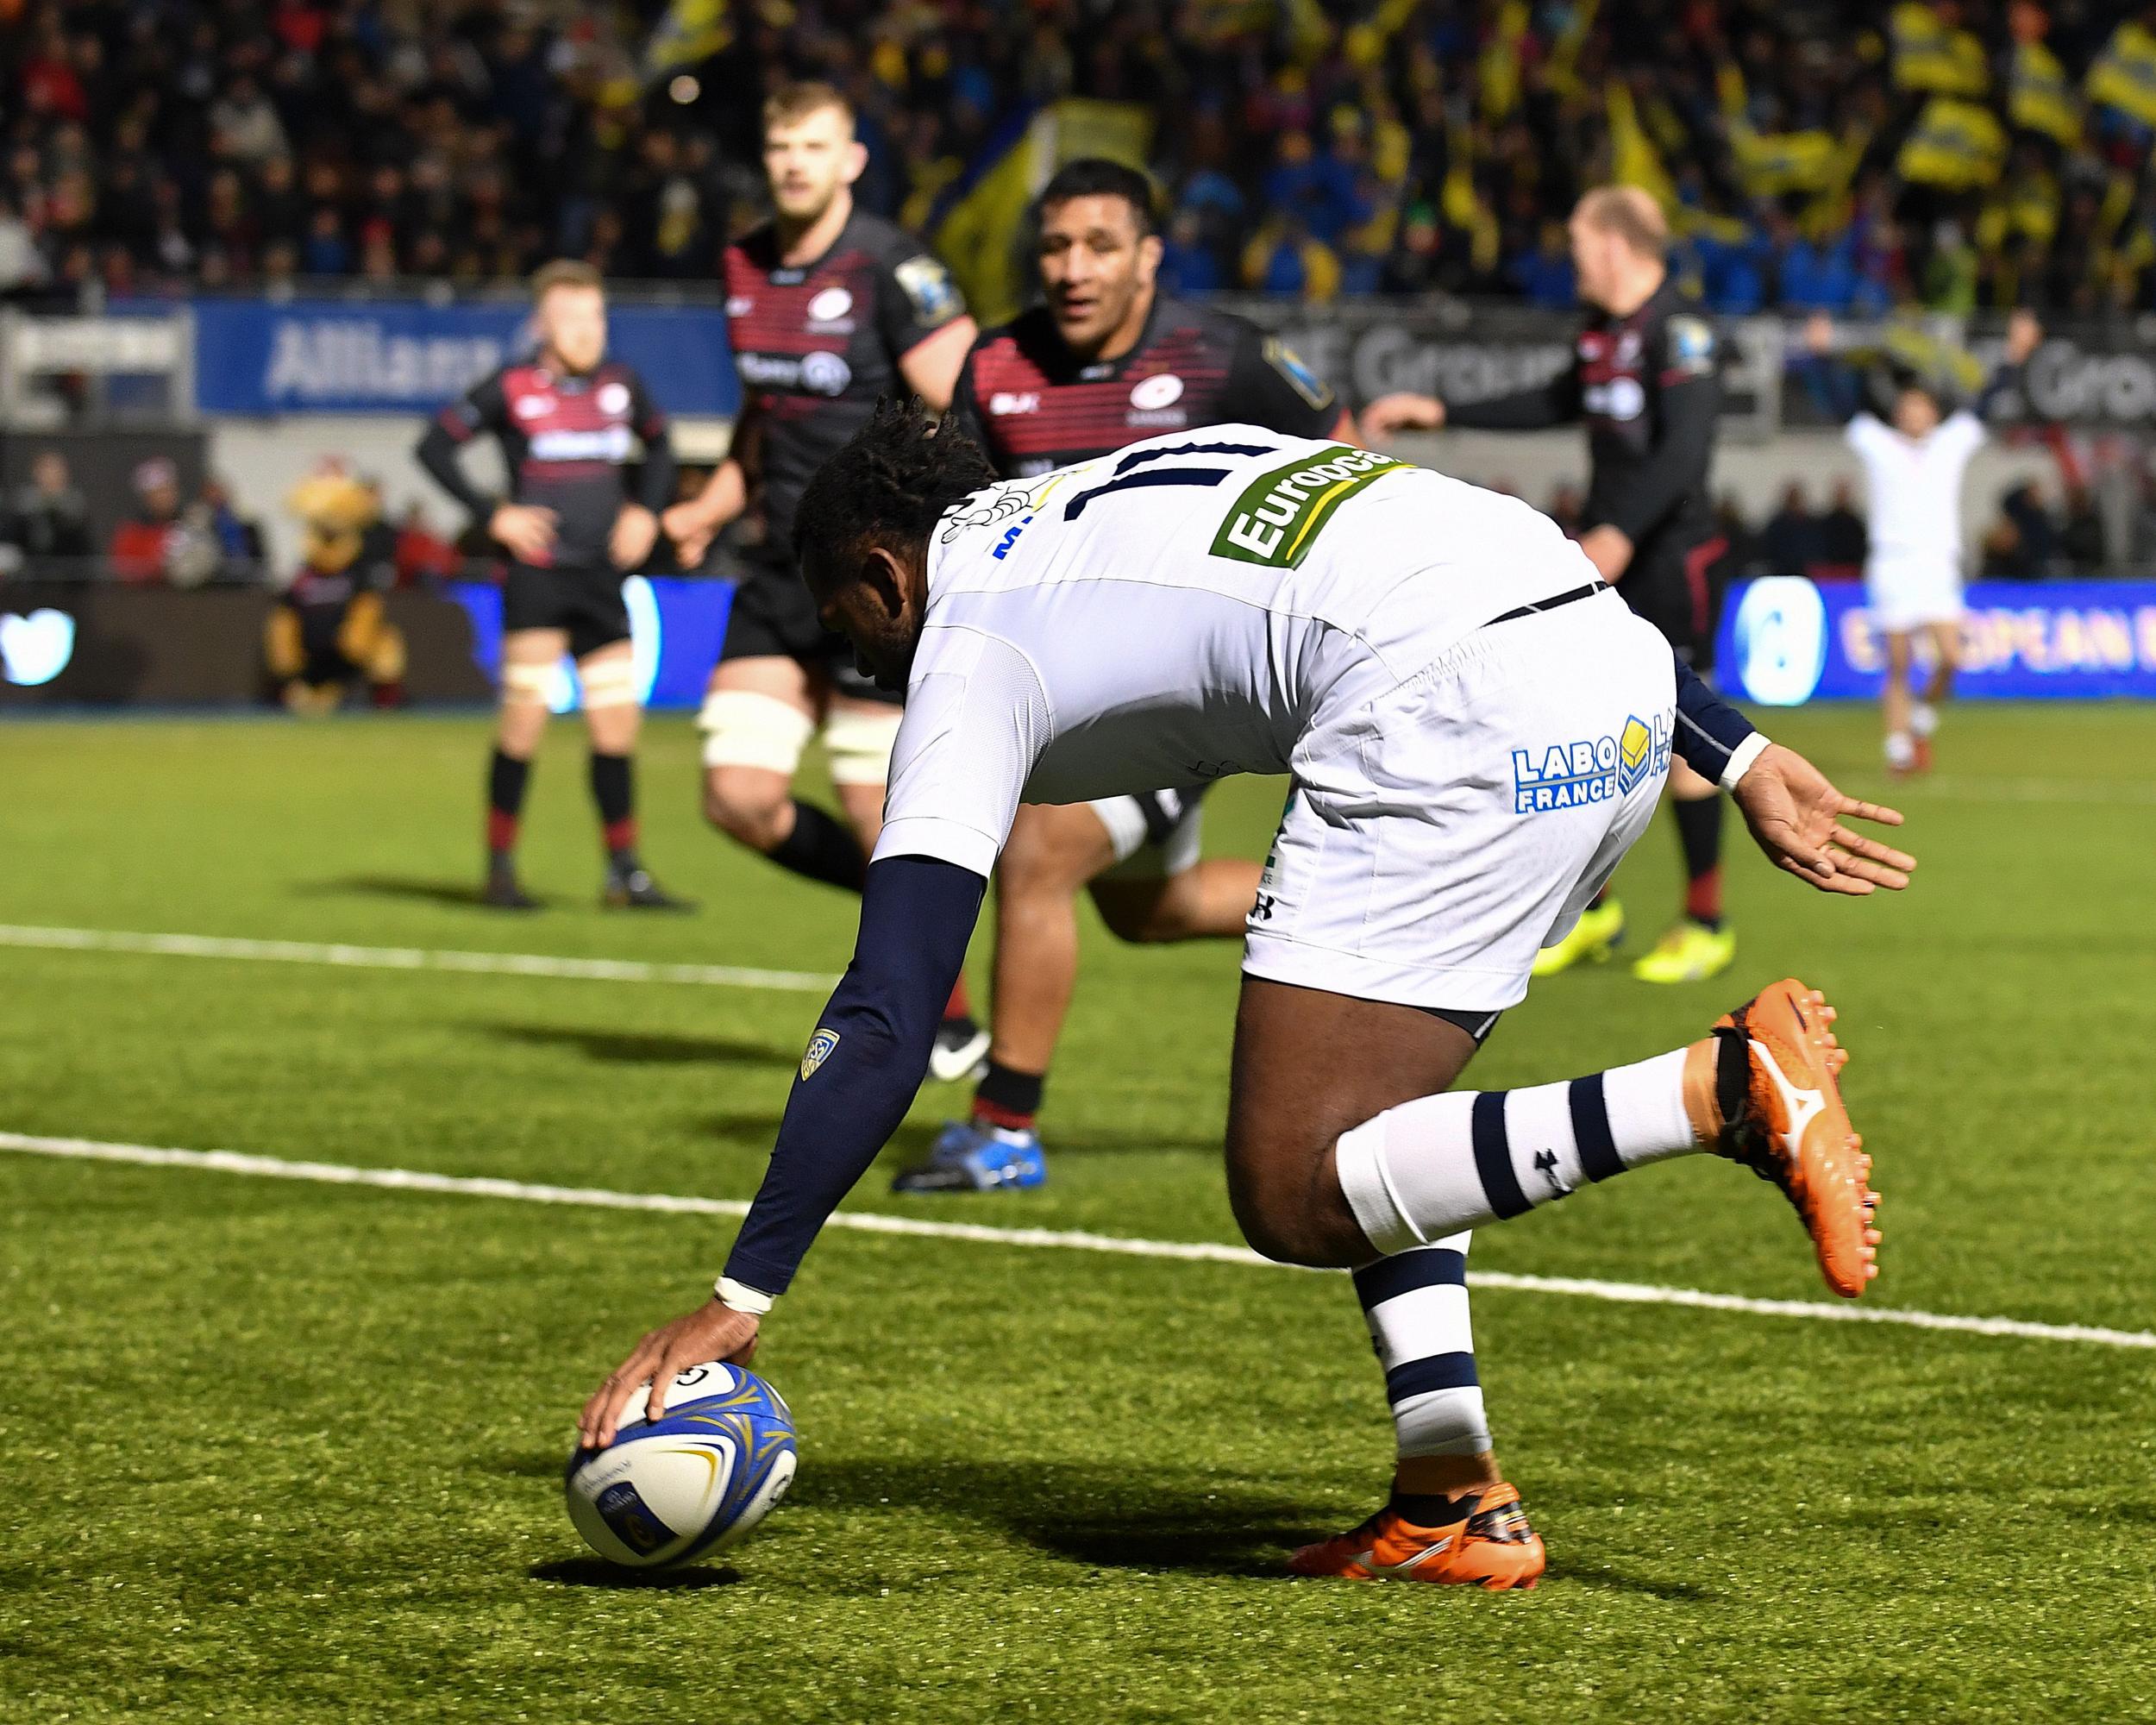 &#13;
Clermont raced into a 24-7 half-time lead &#13;